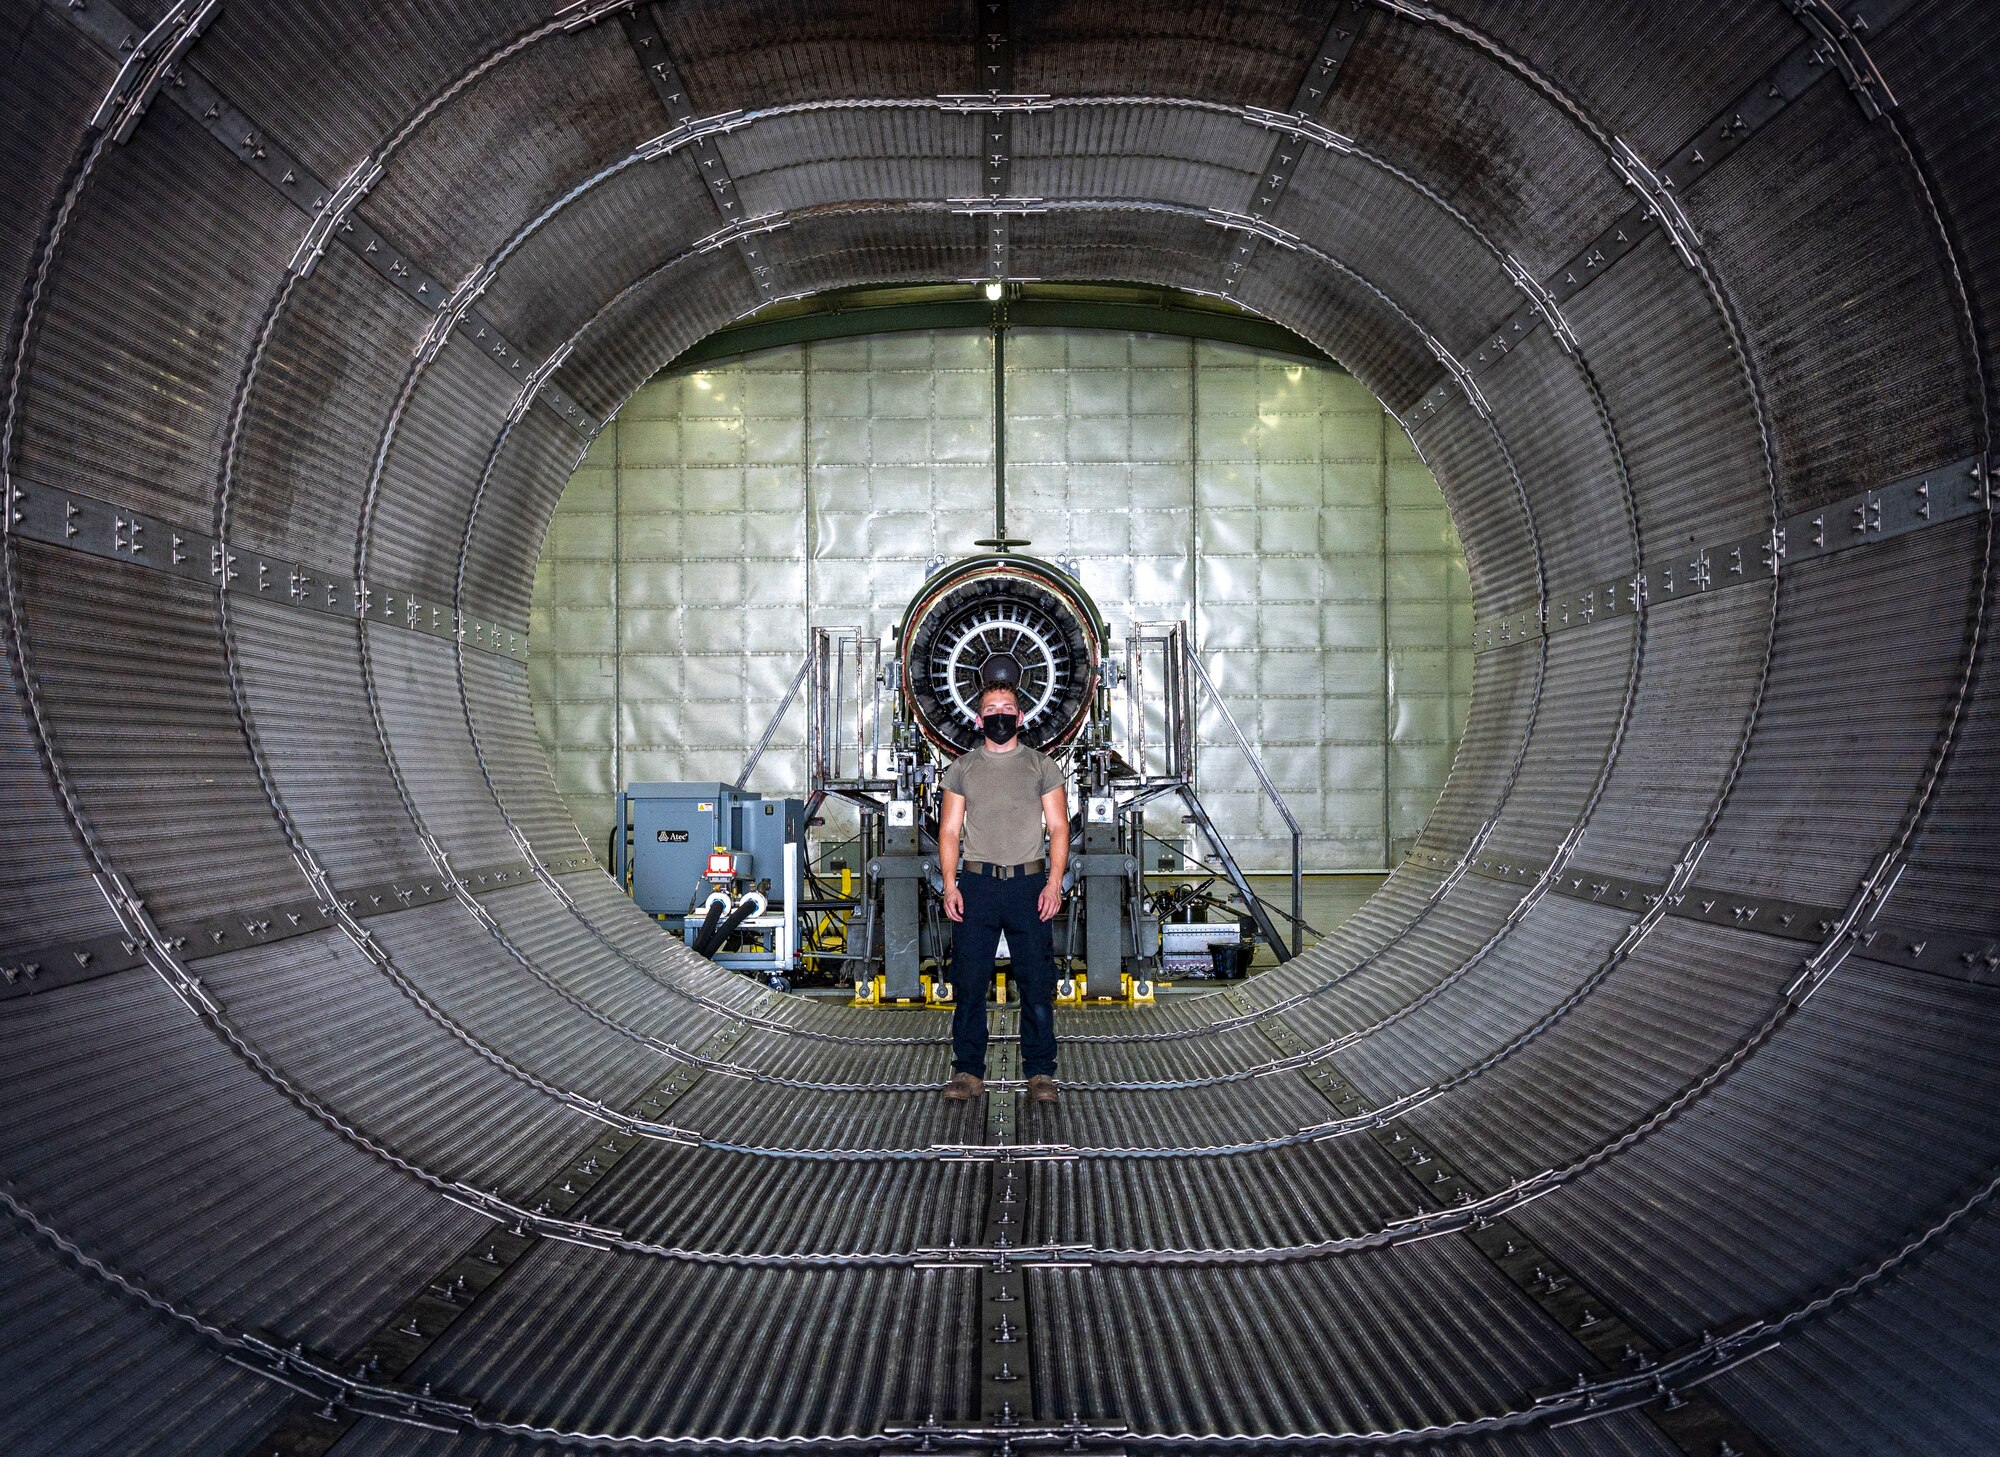 Airman 1st Class Noah Mercer, 4th Component Maintenance Squadron aerospace propulsion technician, stands inside the engine test cell at Seymour Johnson Air Force Base, North Carolina, August 10, 2022. The engine test cell is a specialized hangar used to simulate aircraft fire and test the F-15E Strike Eagle engine throttle. (U.S. Air Force photo by Airman 1st Class Sabrina Fuller)